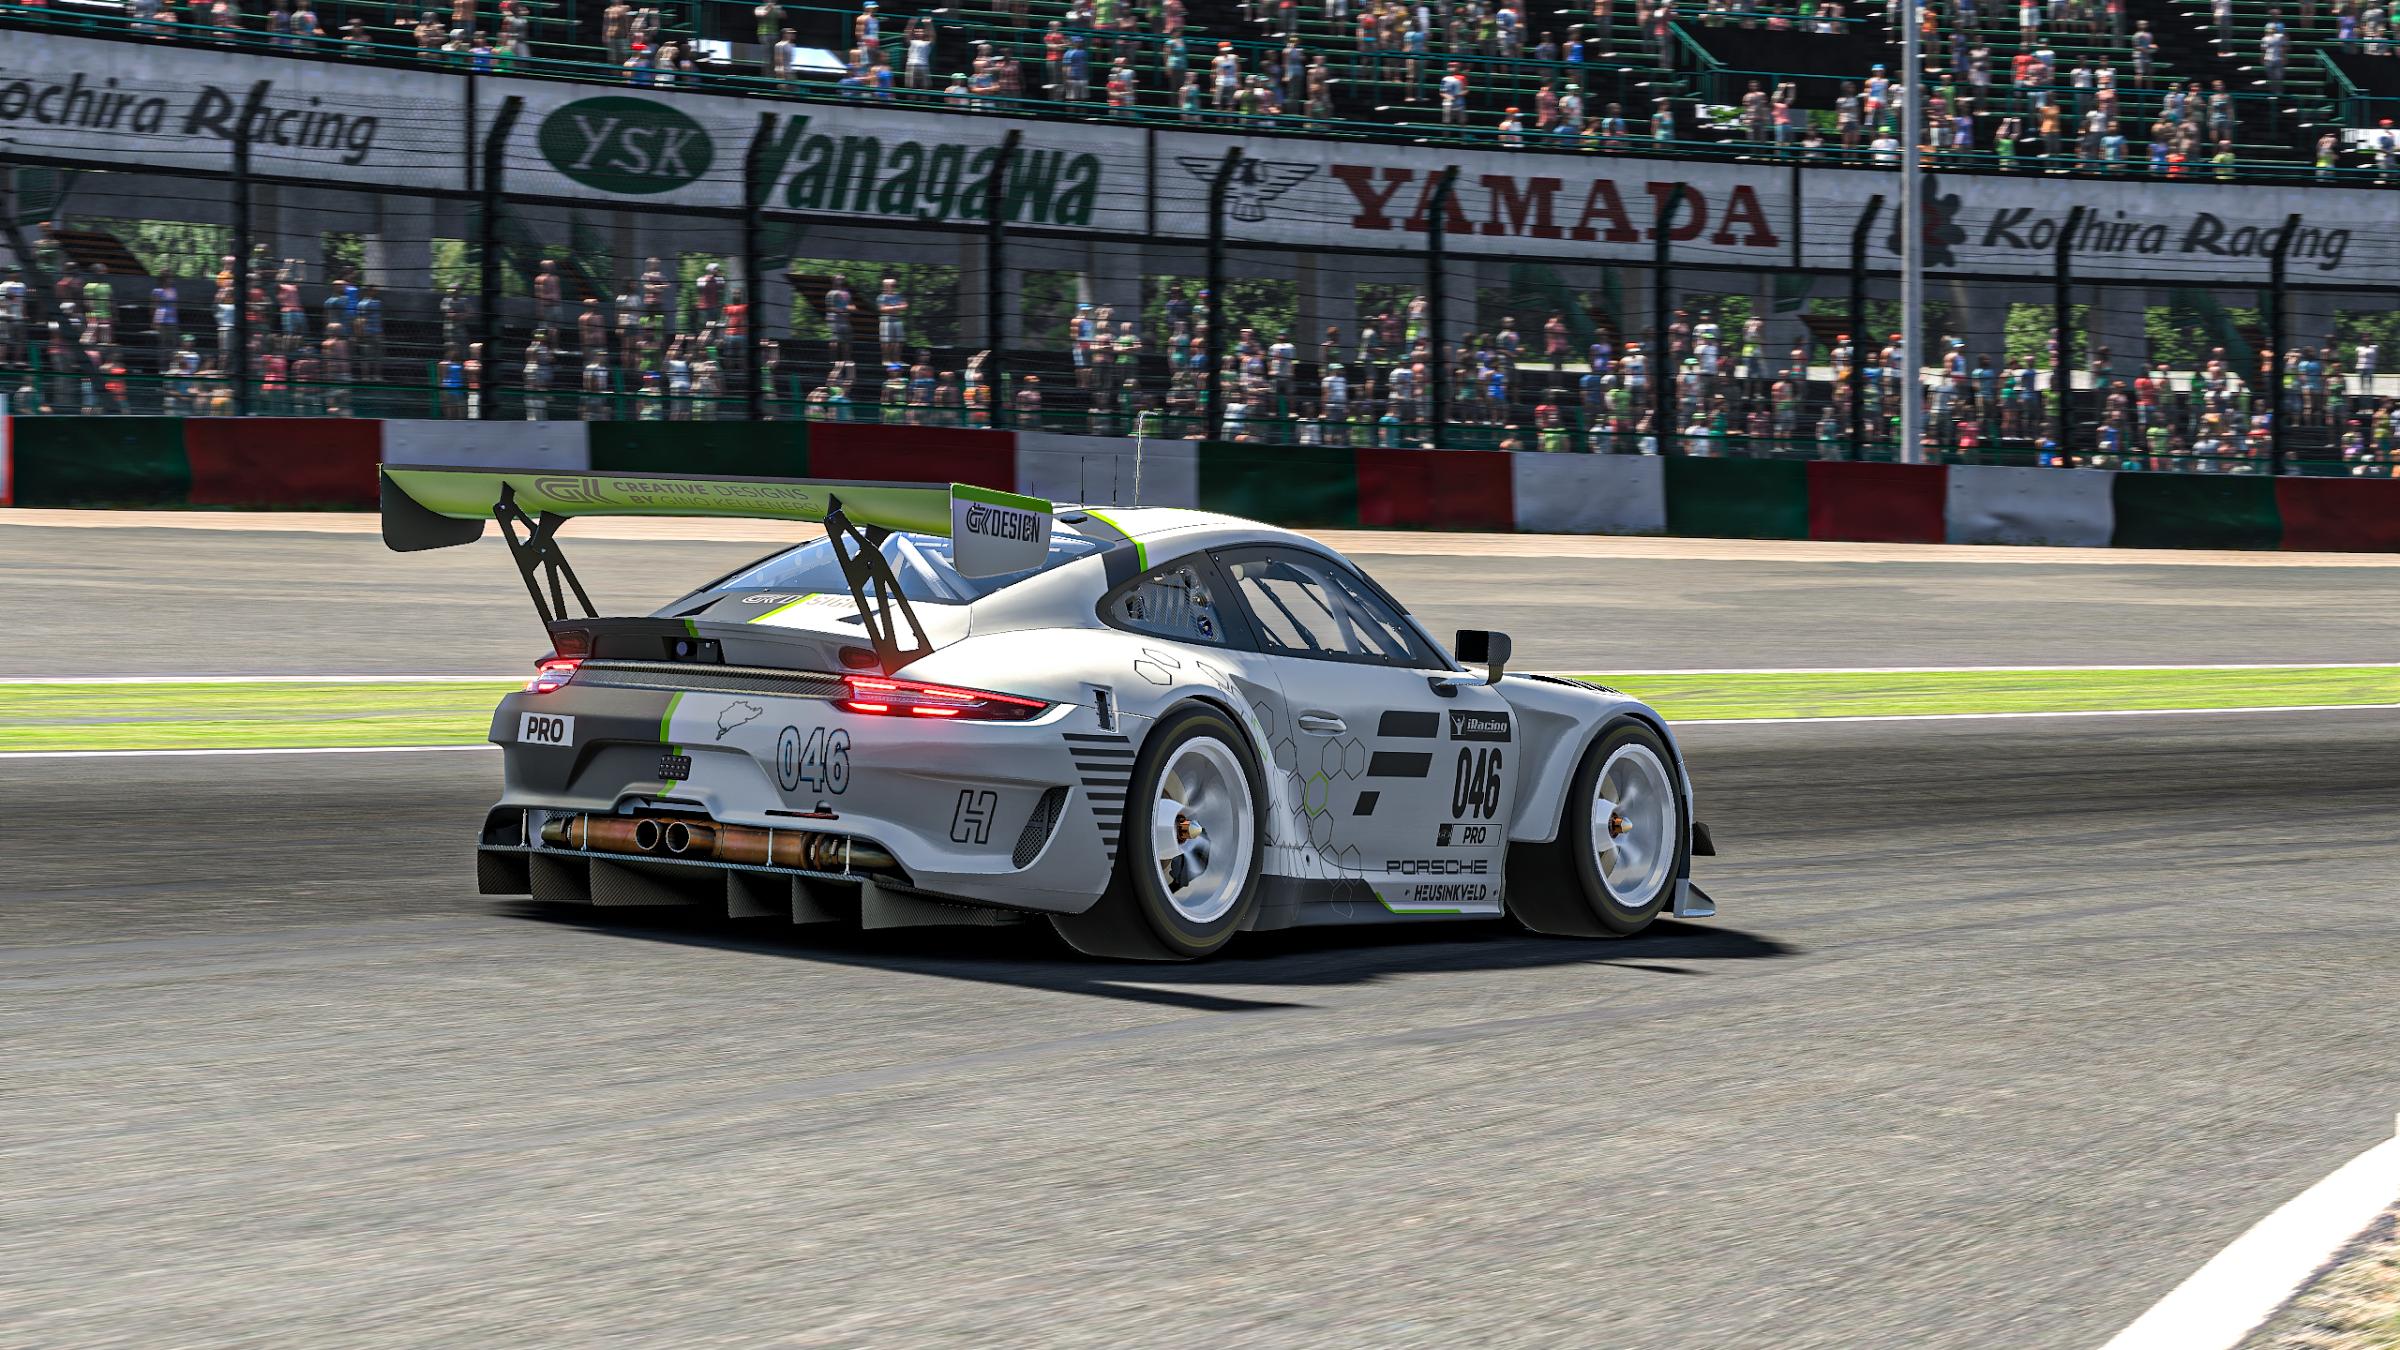 Preview of Fanatec Duotone Livery - Porsche 911 GT3 R by Gino Kelleners